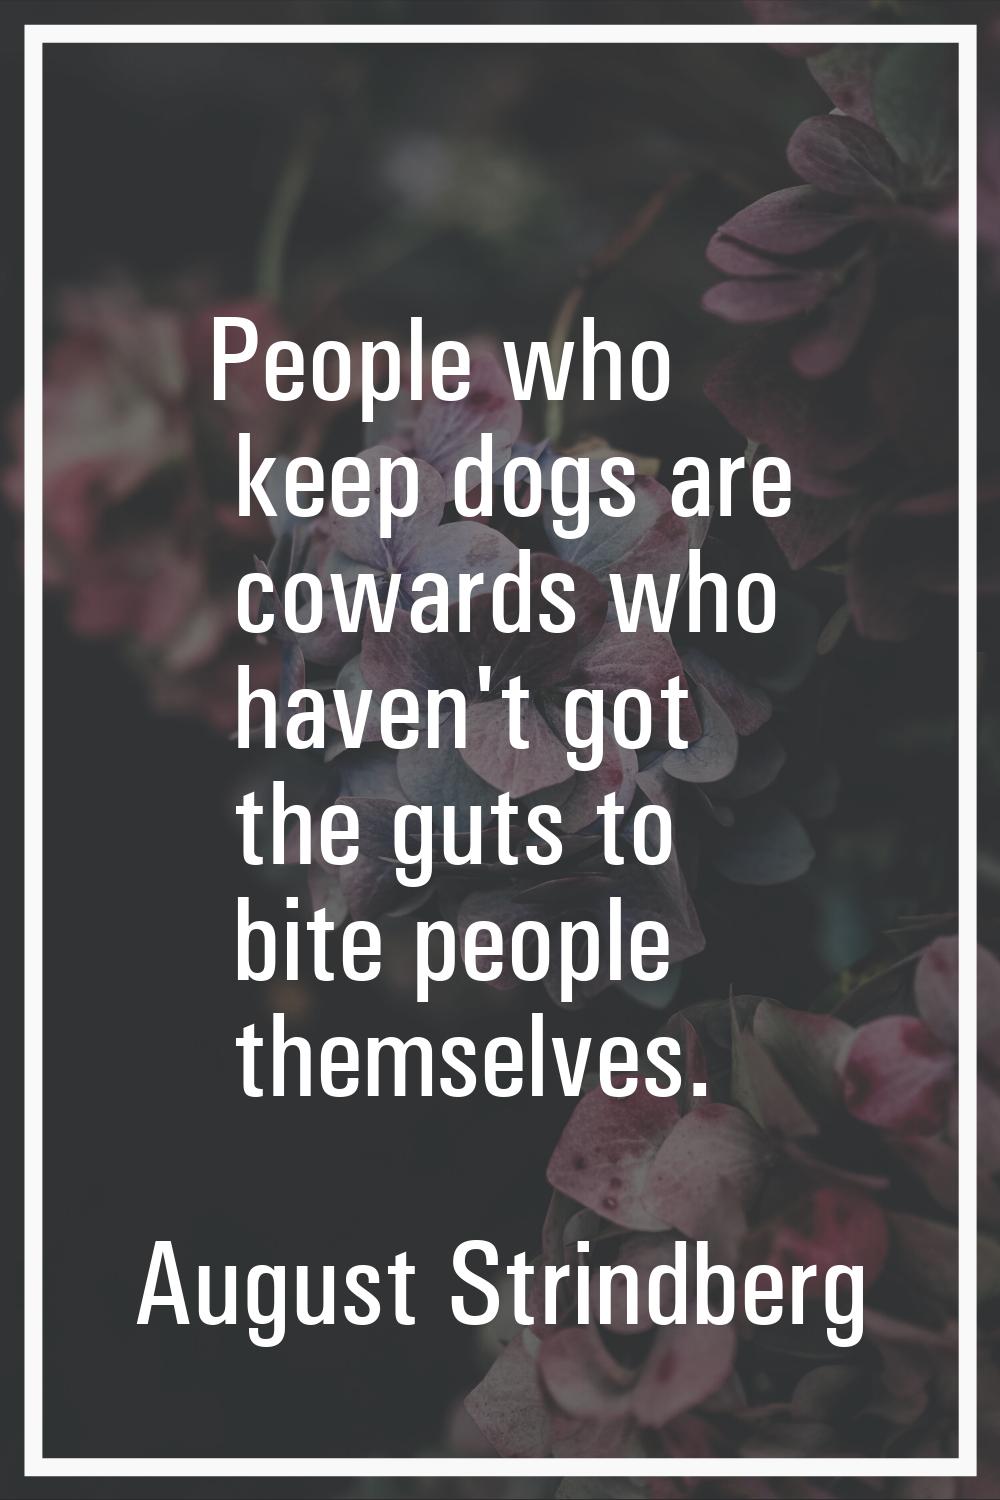 People who keep dogs are cowards who haven't got the guts to bite people themselves.